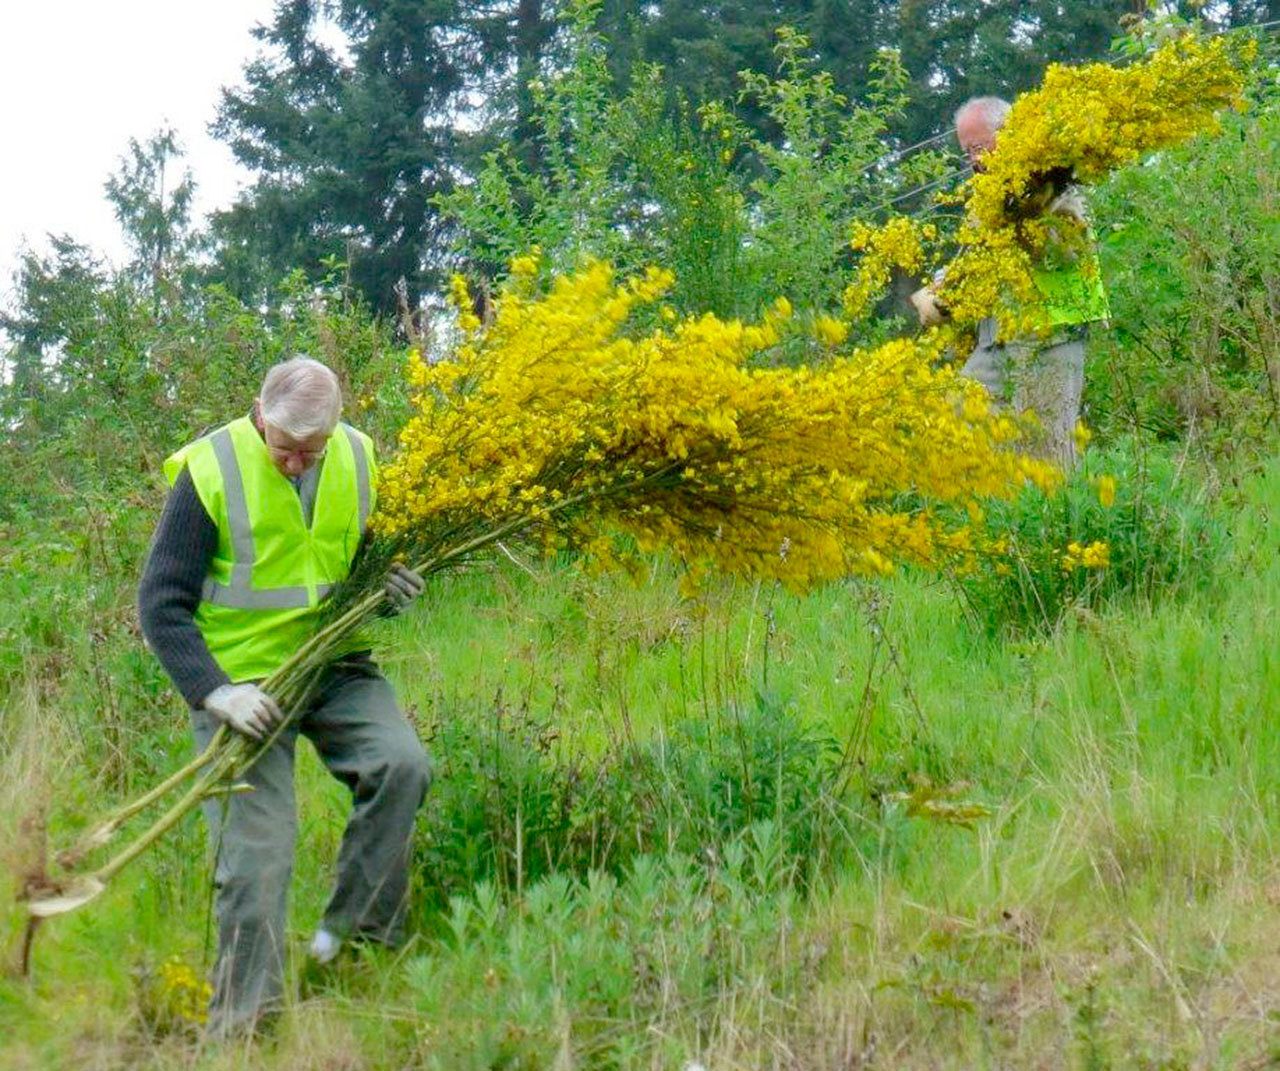 Gretha Davis won first place in the Clallam County Noxious Weed Control Board photography contest with a photograph showing scotch broom being removed. (Clallam County Noxious Weed Control Board)